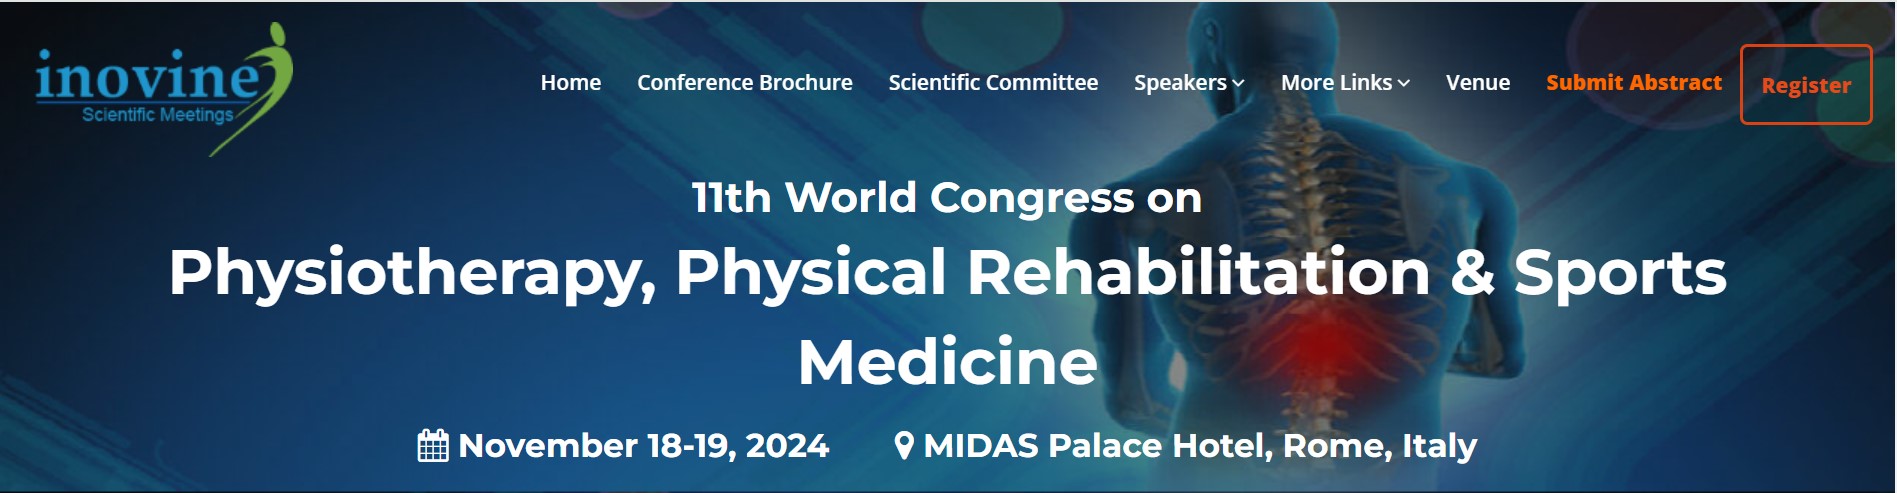 11th World Congress on Physiotherapy, Physical Rehabilitation & Sports Medicine